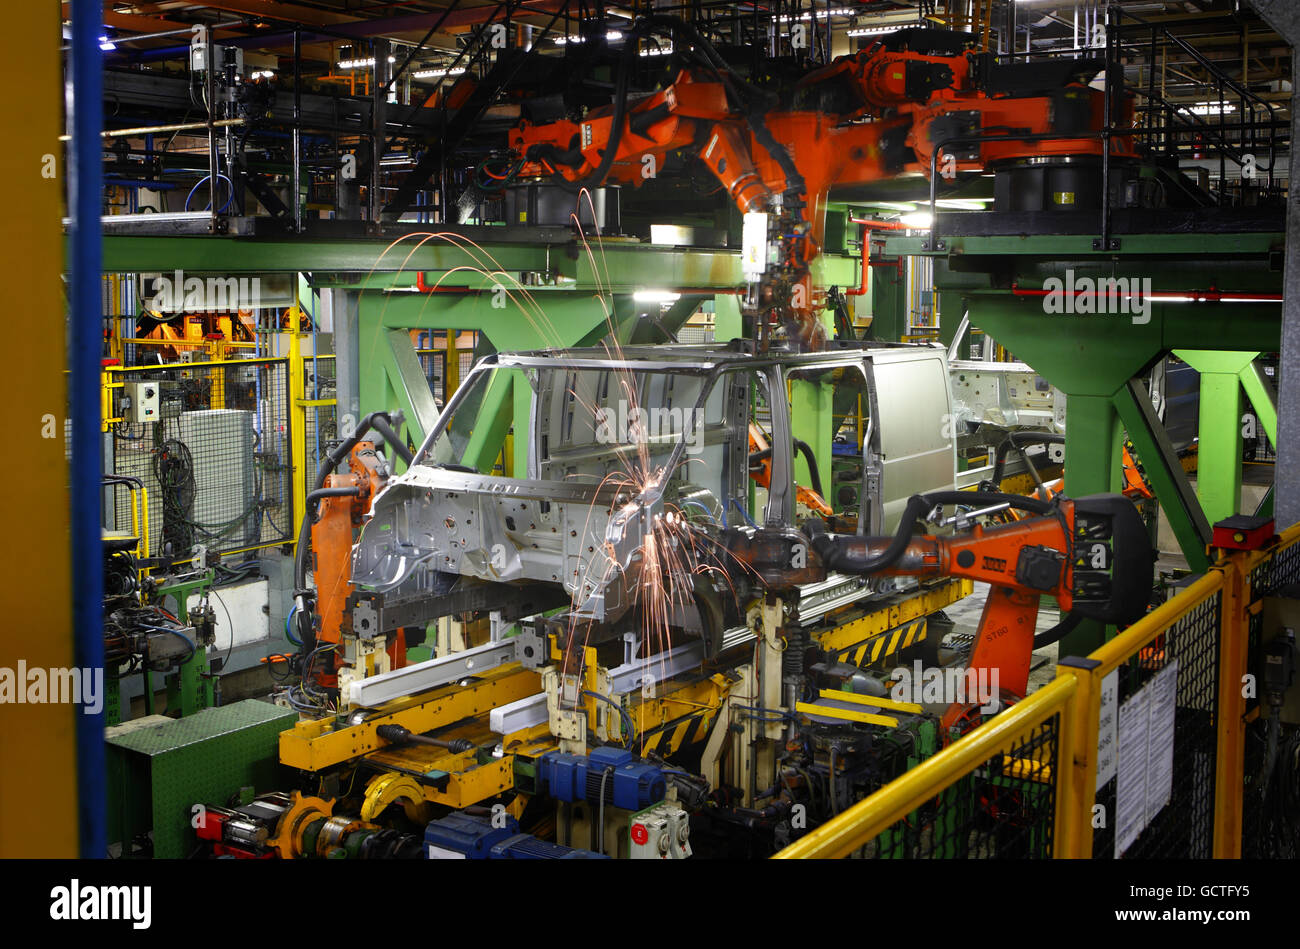 Robots weld a Transit van together at the Ford factory in Southampton, Hampshire where 125 vans roll off the production line each day. Production has halved in the last year with 500 staff being made redundant due to reduced demand in the market. However, the iconic vehicle still accounts for one in three vans sold in the UK. Stock Photo